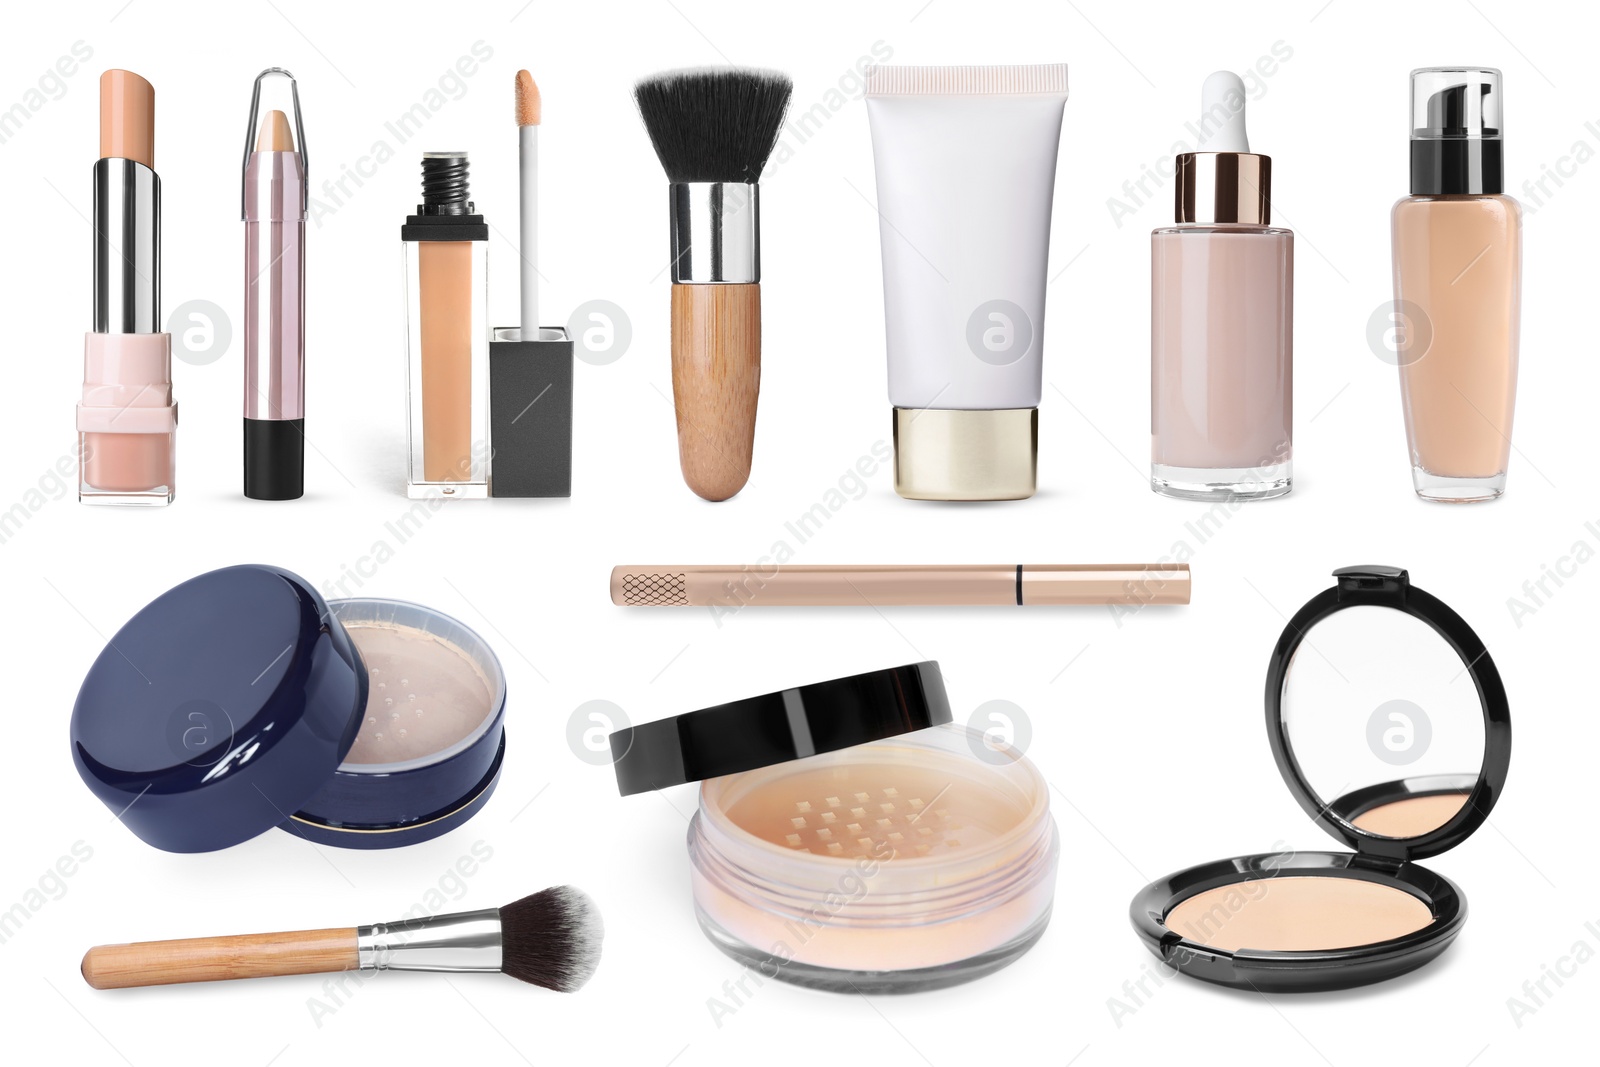 Image of Face powders, concealers, correctors, liquid foundations and brushes isolated on white. Collection of makeup products